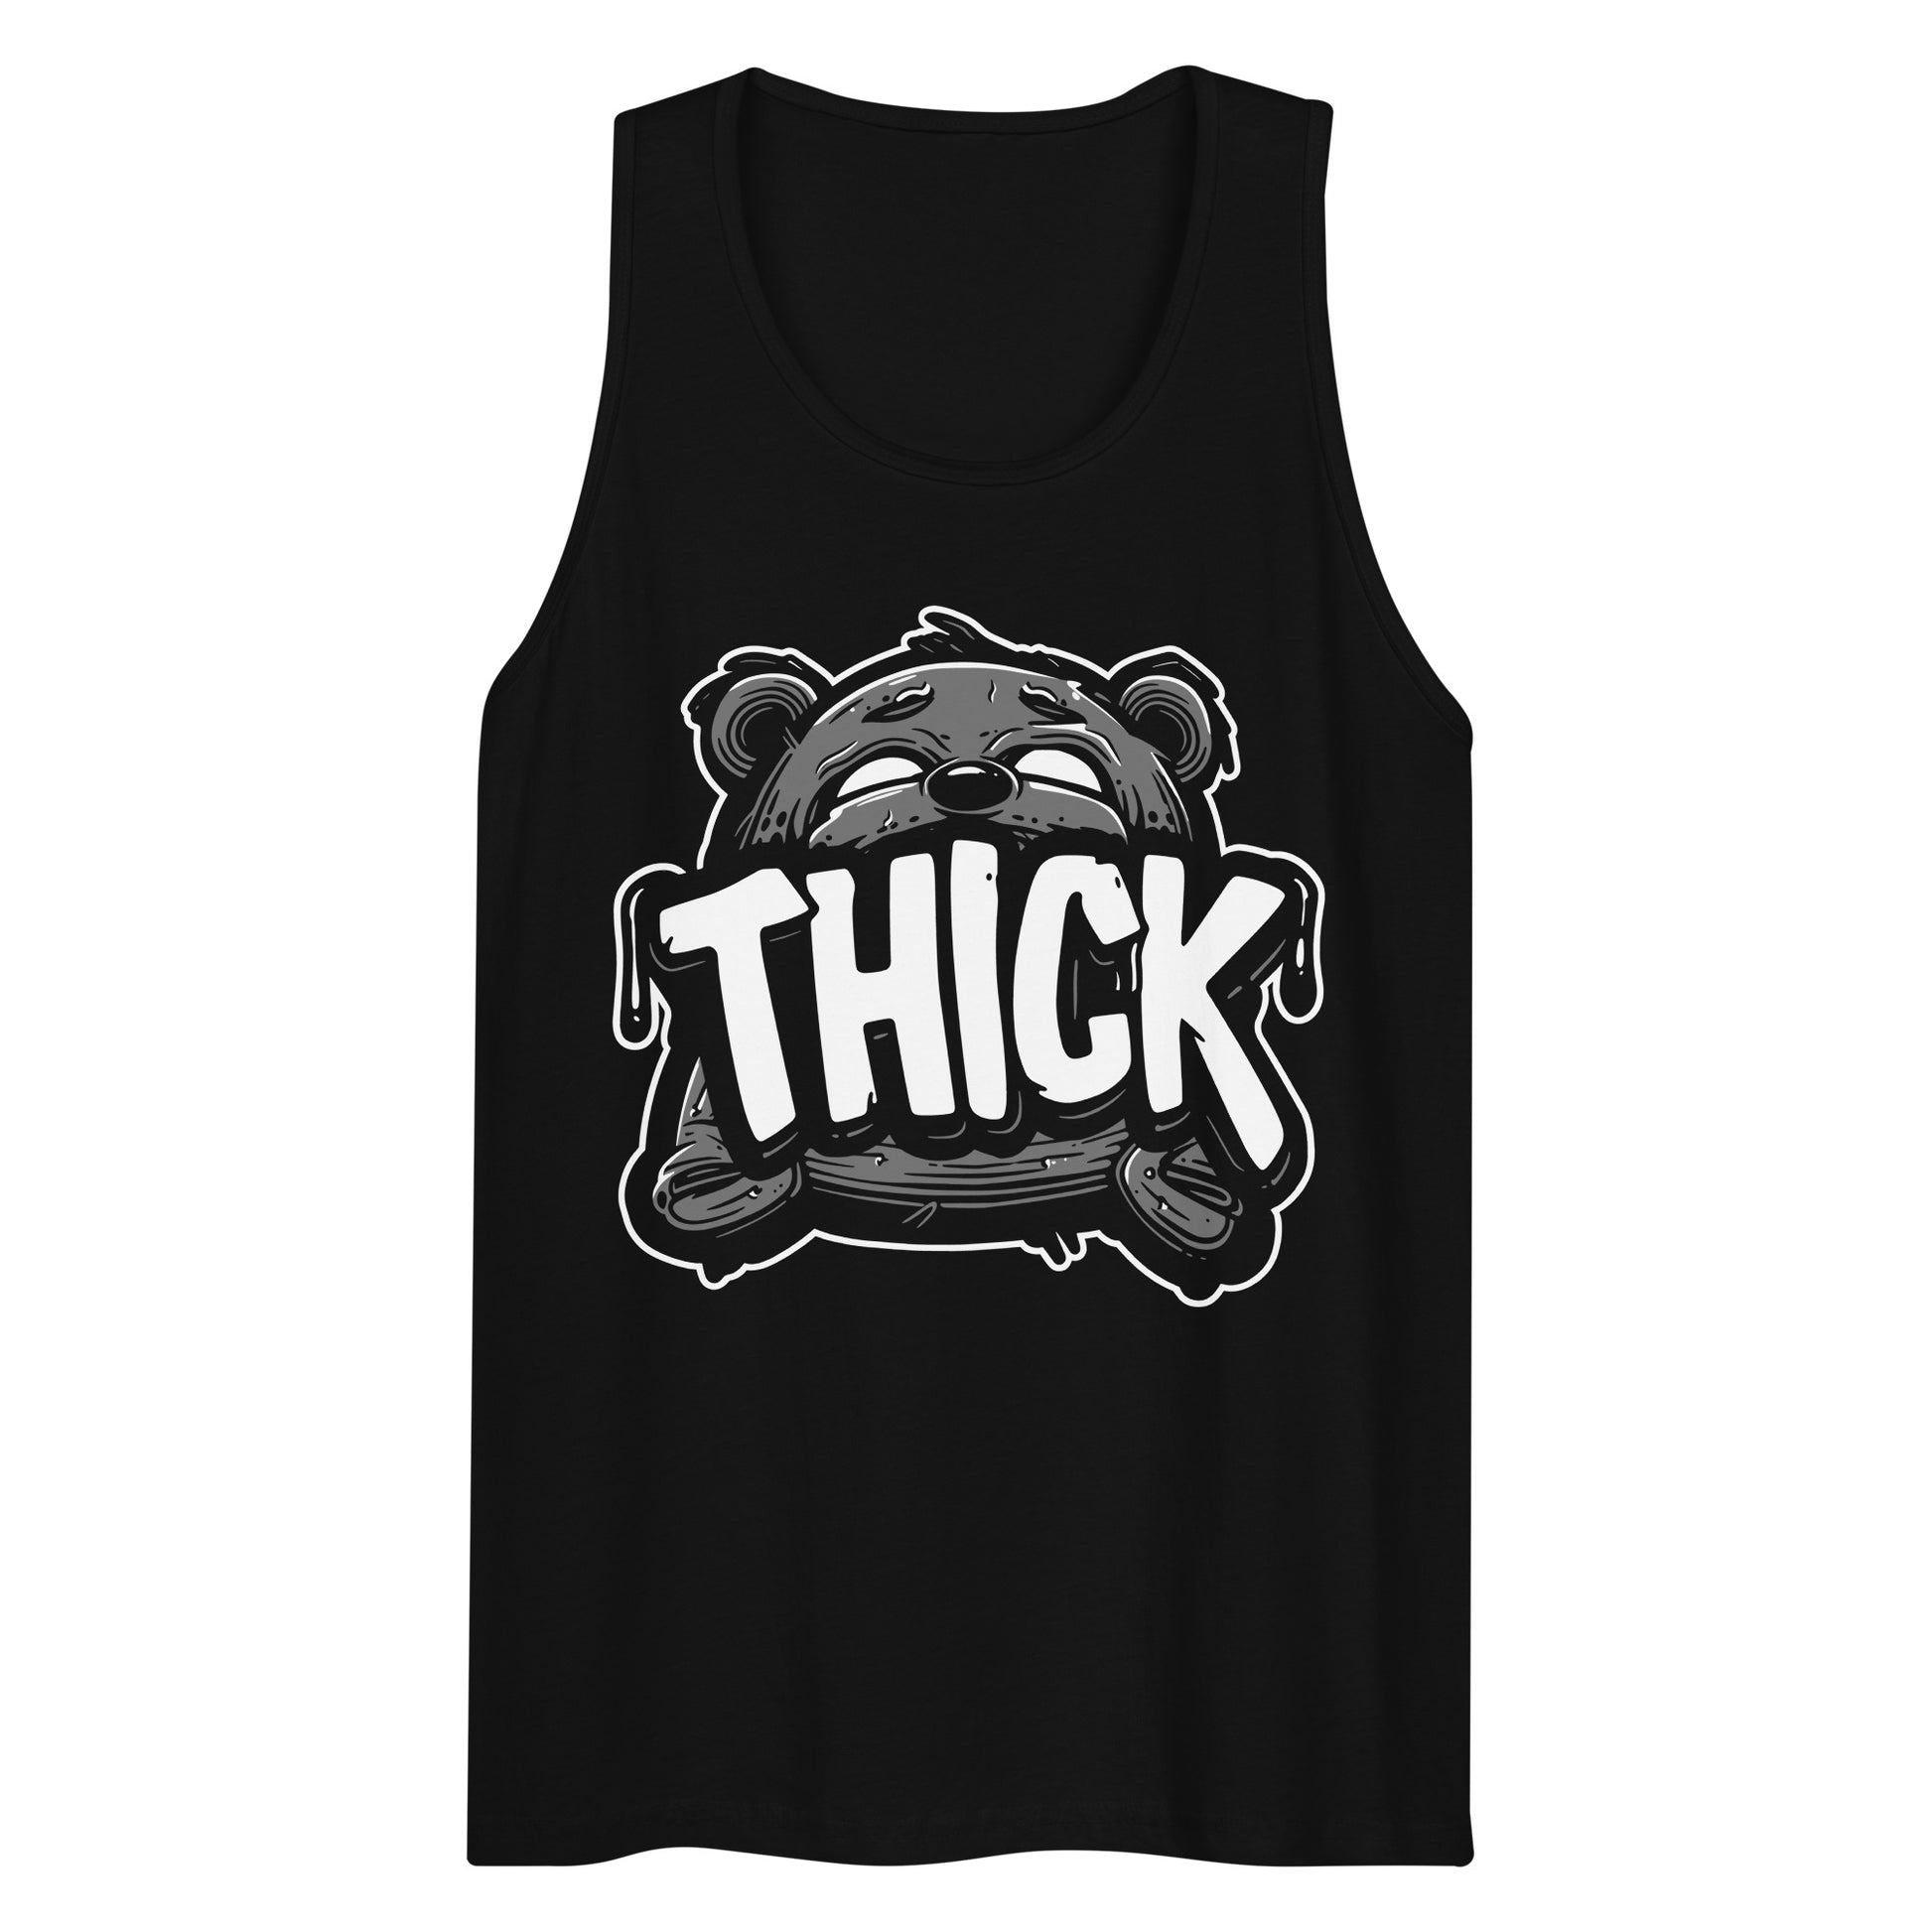 Cuddly & Bold "THICK" Statement Gay Bear Tank Top